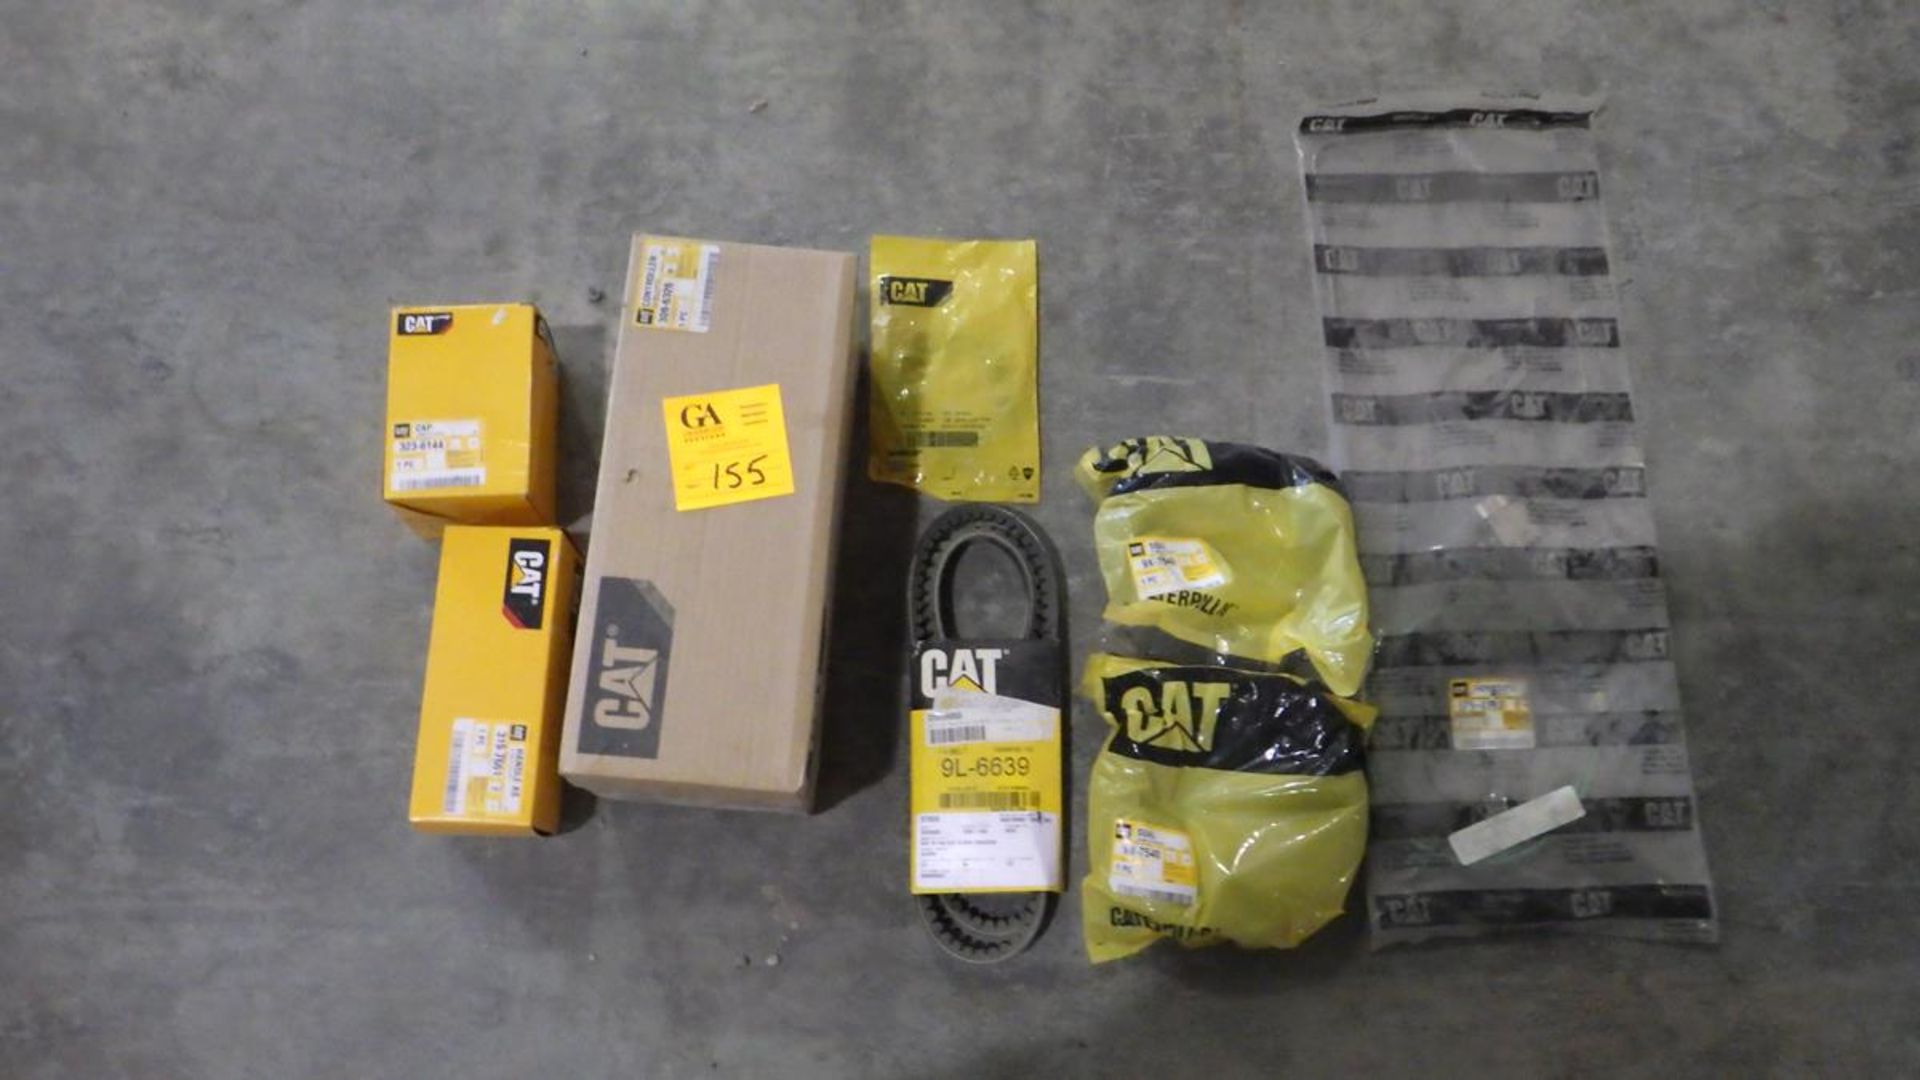 LOT OF UNUSED CATERPILLAR PARTS INCLUDING CONTROLLER AND BELT - Image 3 of 3